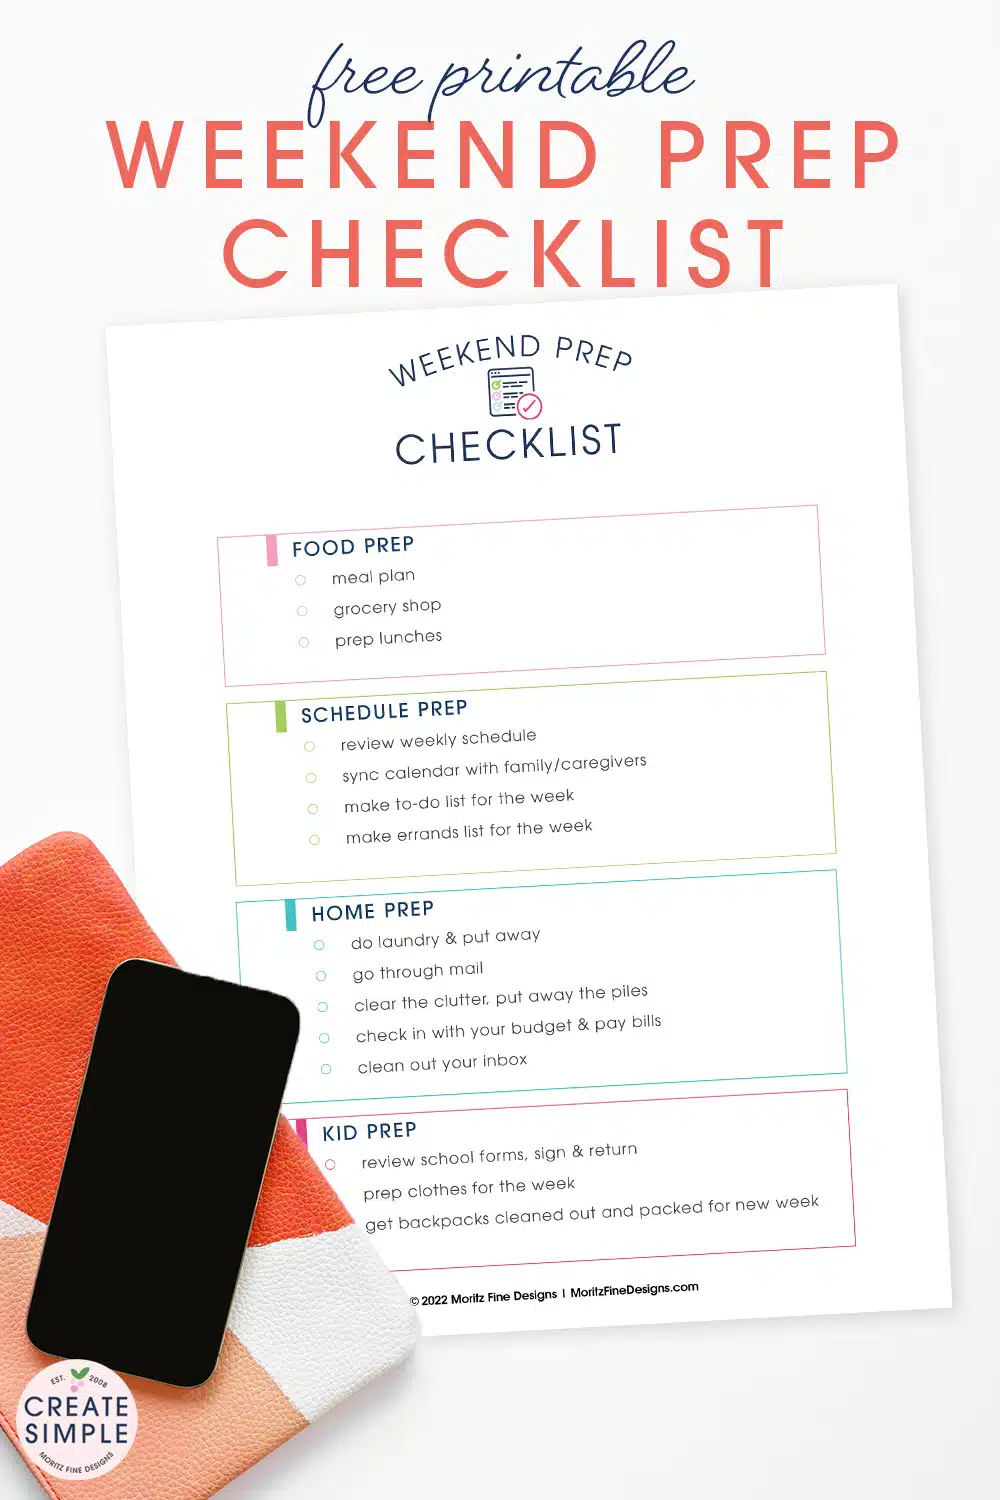 Get ready to slay your week by using our free printable Weekend Prep Checklist. A little work on the weekend makes your week smooth and easy.